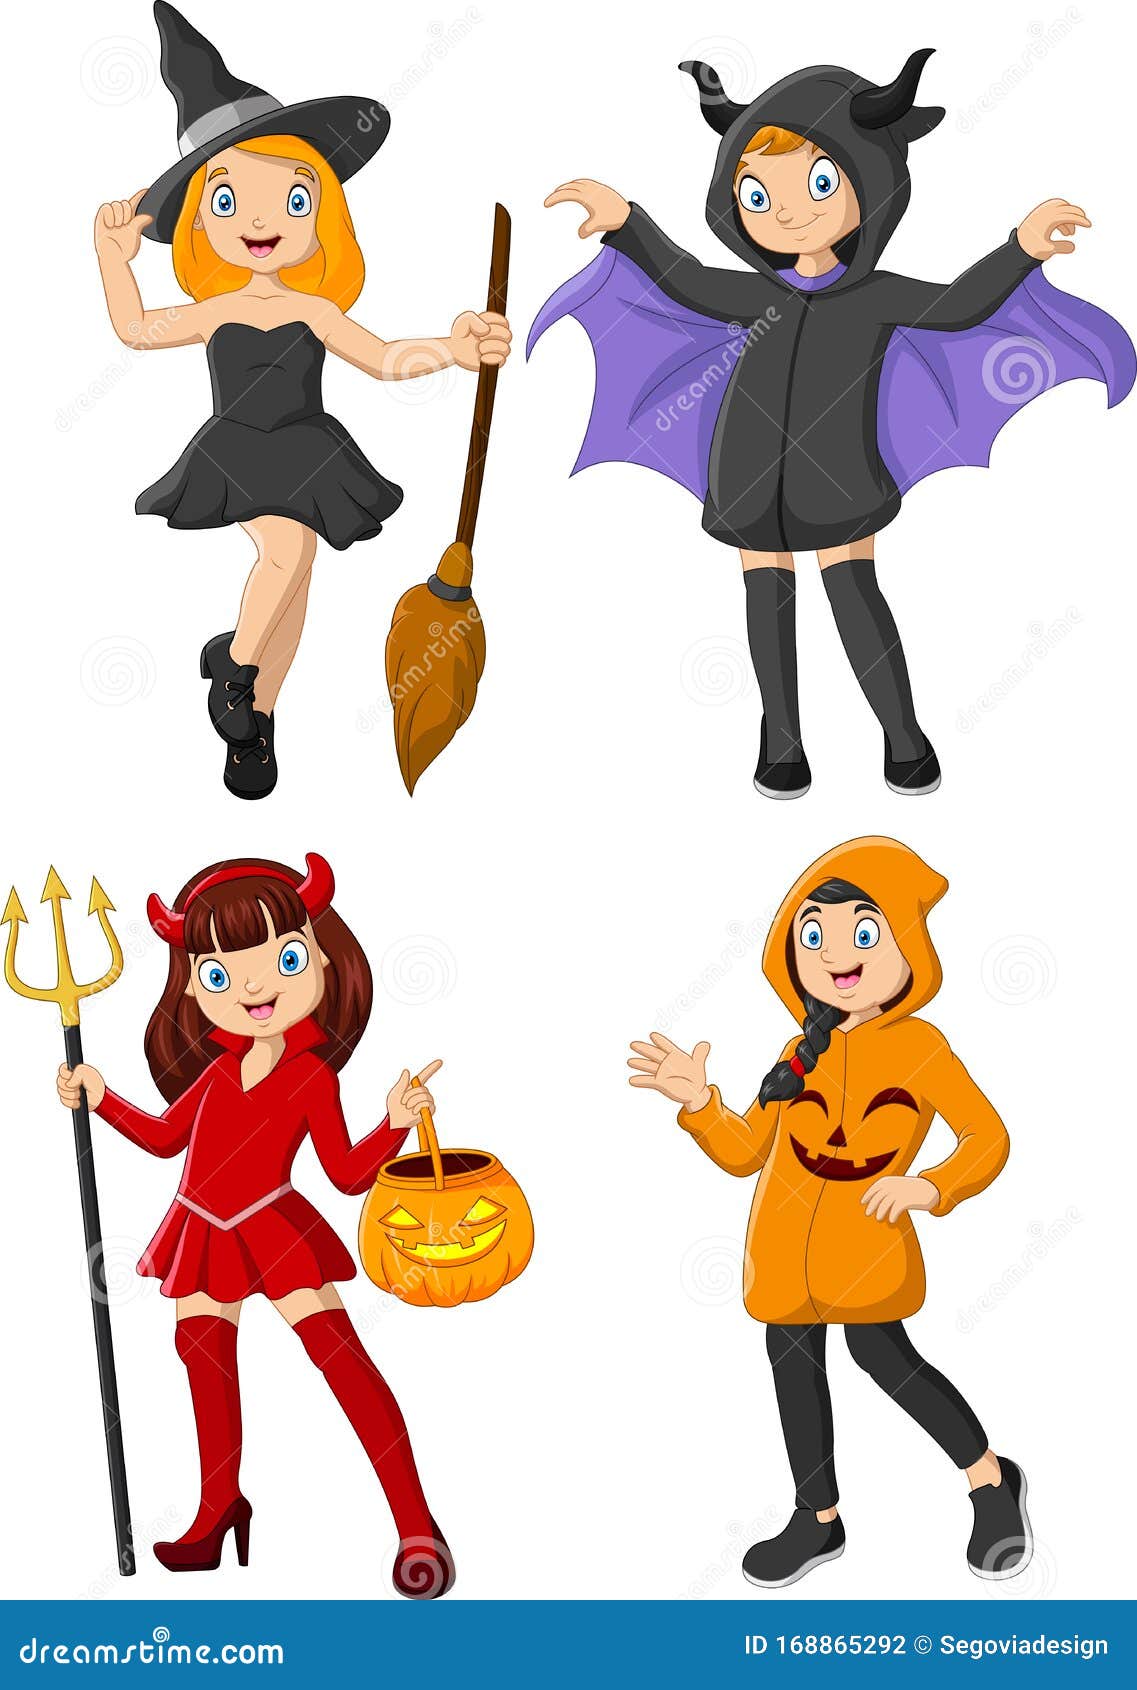 Group of Cartoon Kids Wearing Different Costumes Stock Vector ...